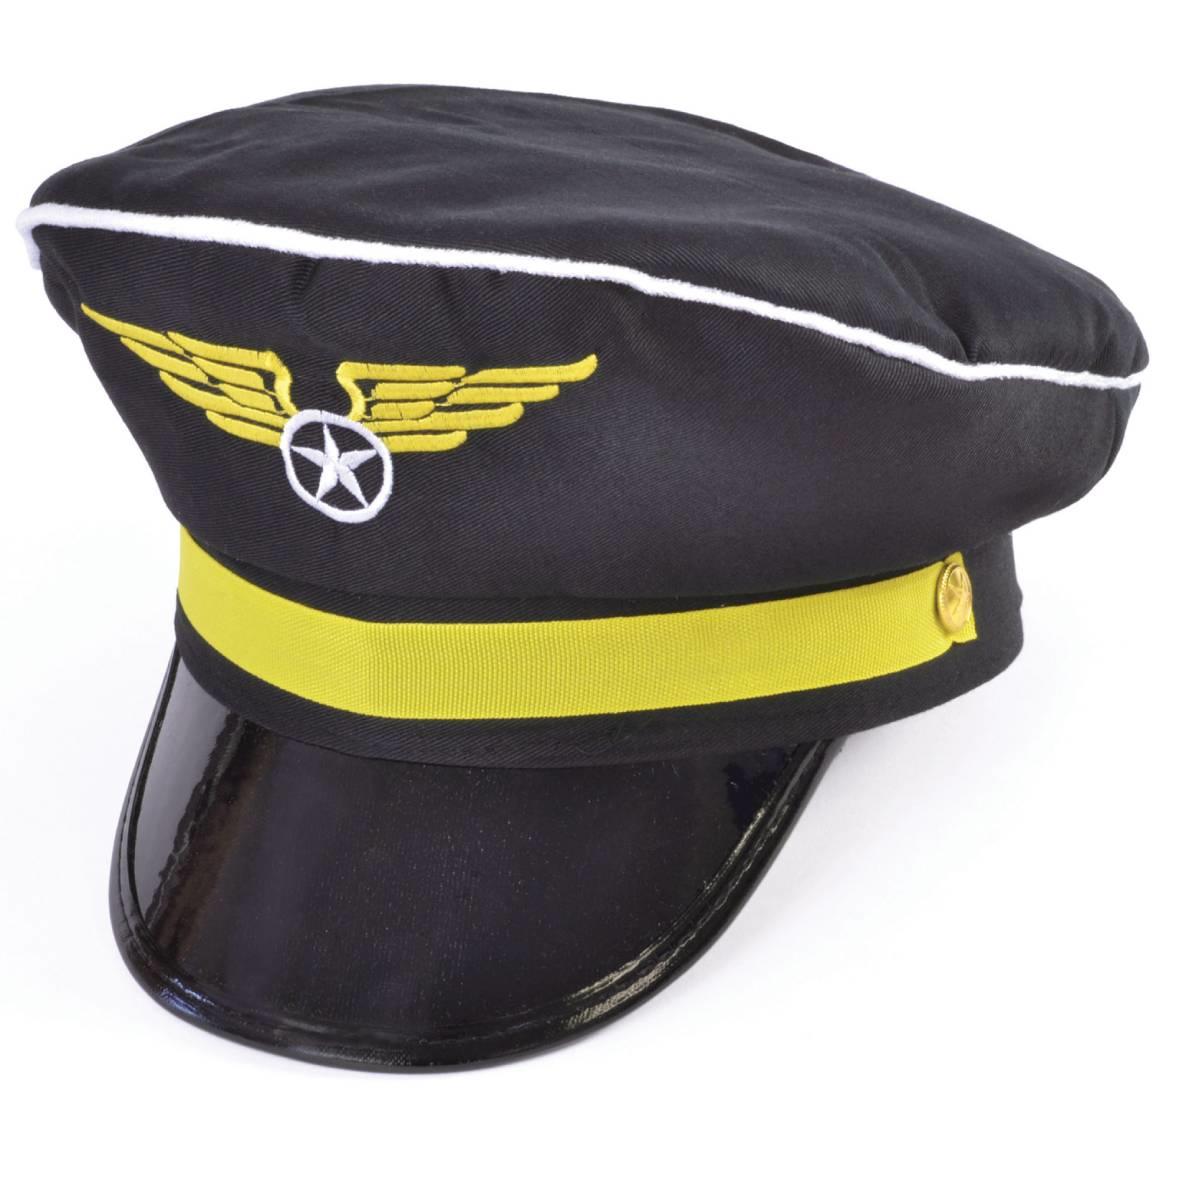 Airline Pilot Captain Hat by Bristol Novelties BH446 available here at Karnival Costumes online party shop